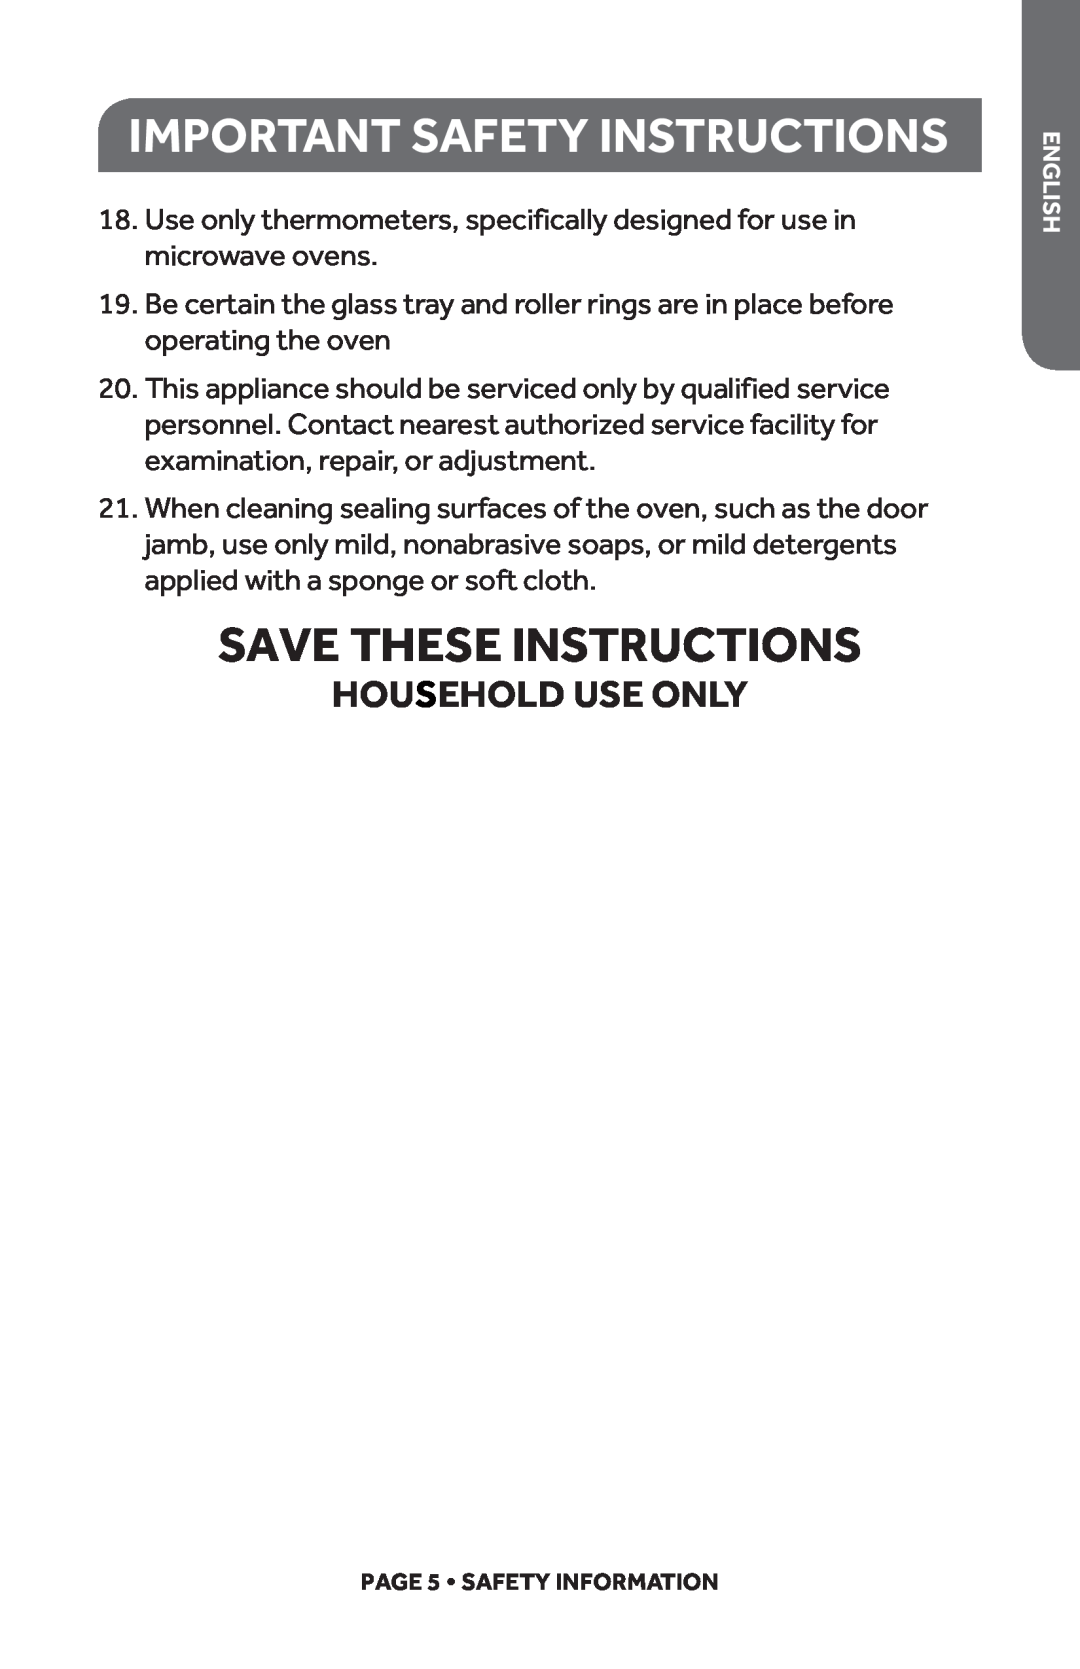 Haier HMC1035SESS user manual Save These Instructions, Household Use Only, Important Safety Instructions 